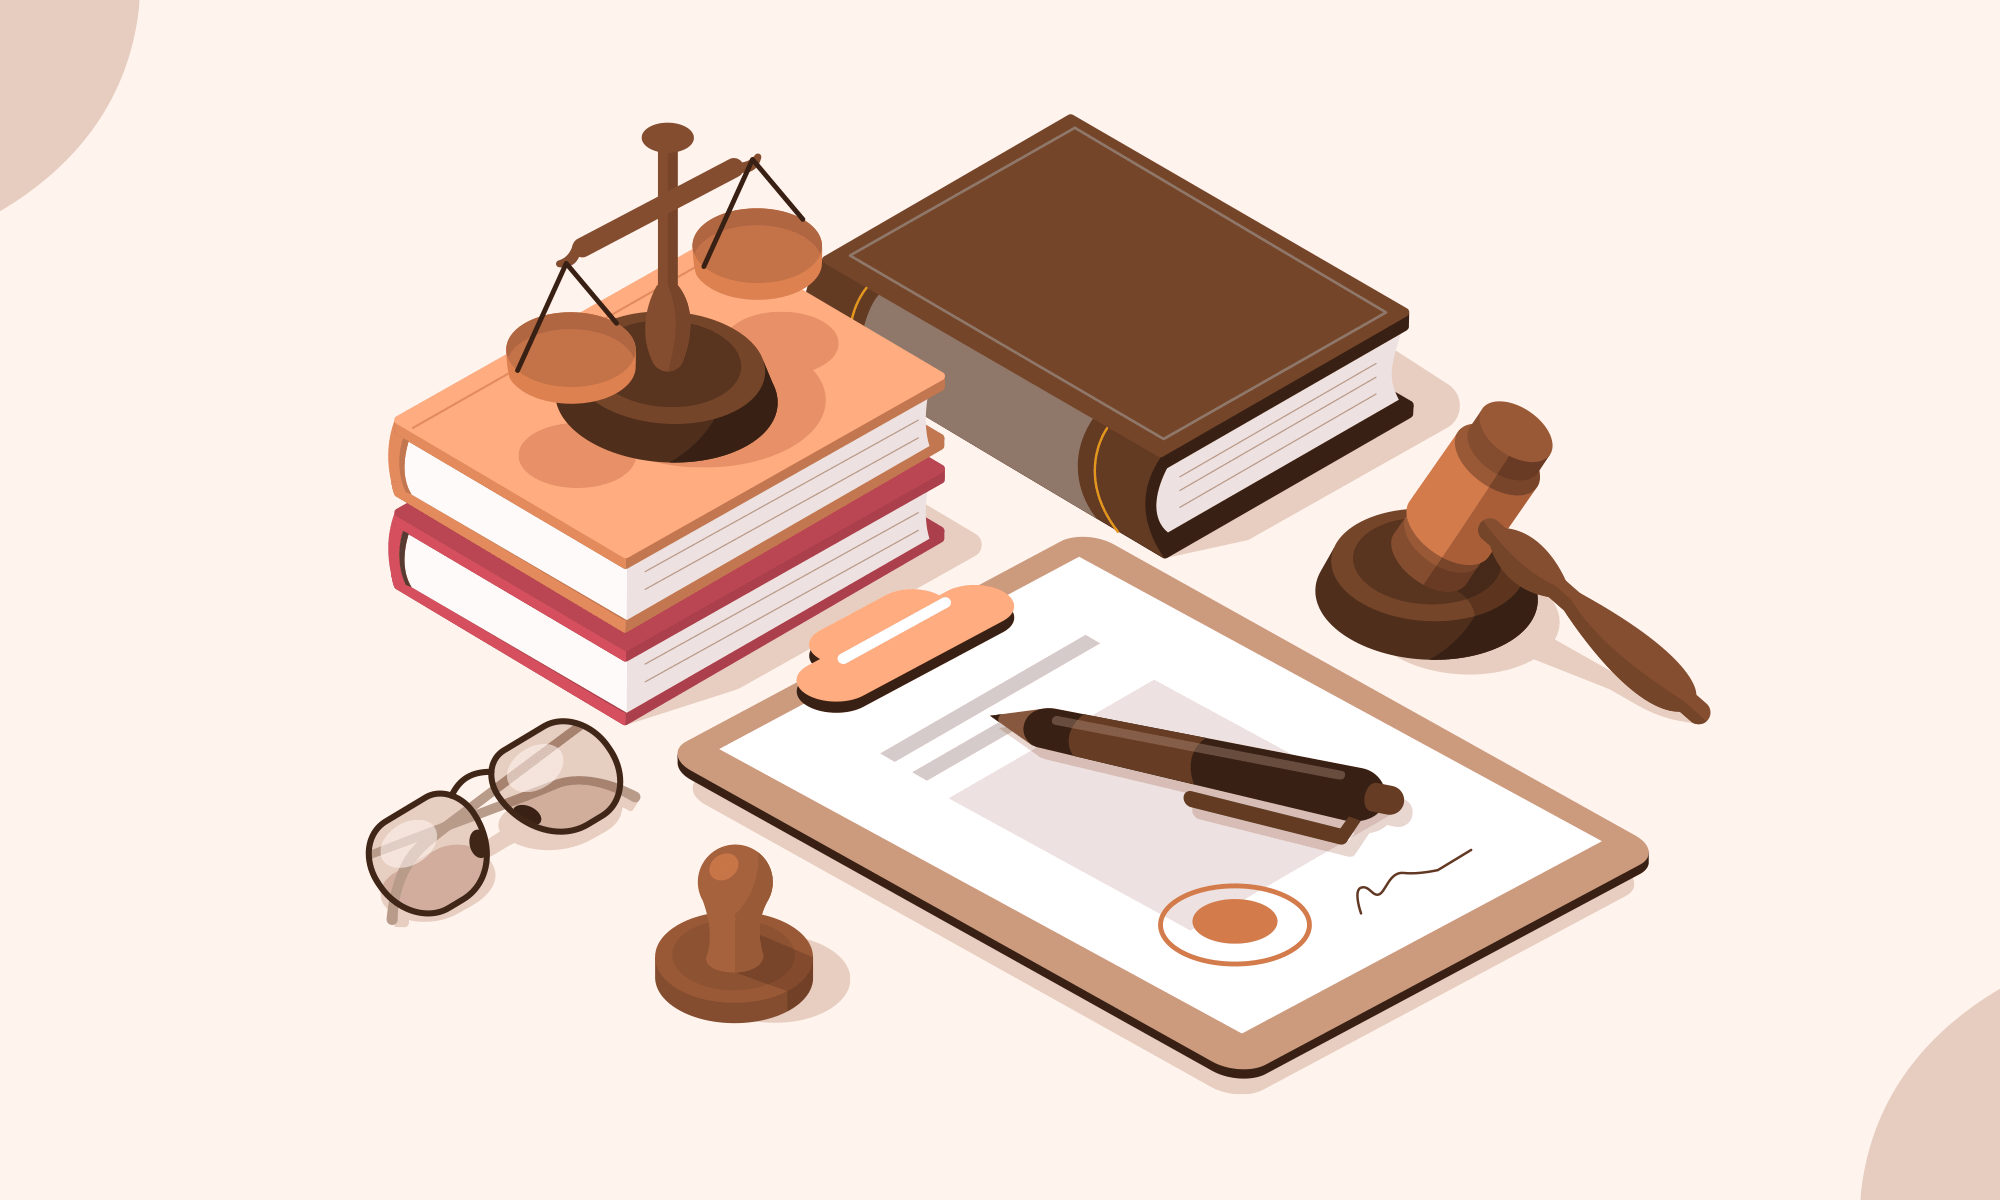 Various objects related to law and compliance